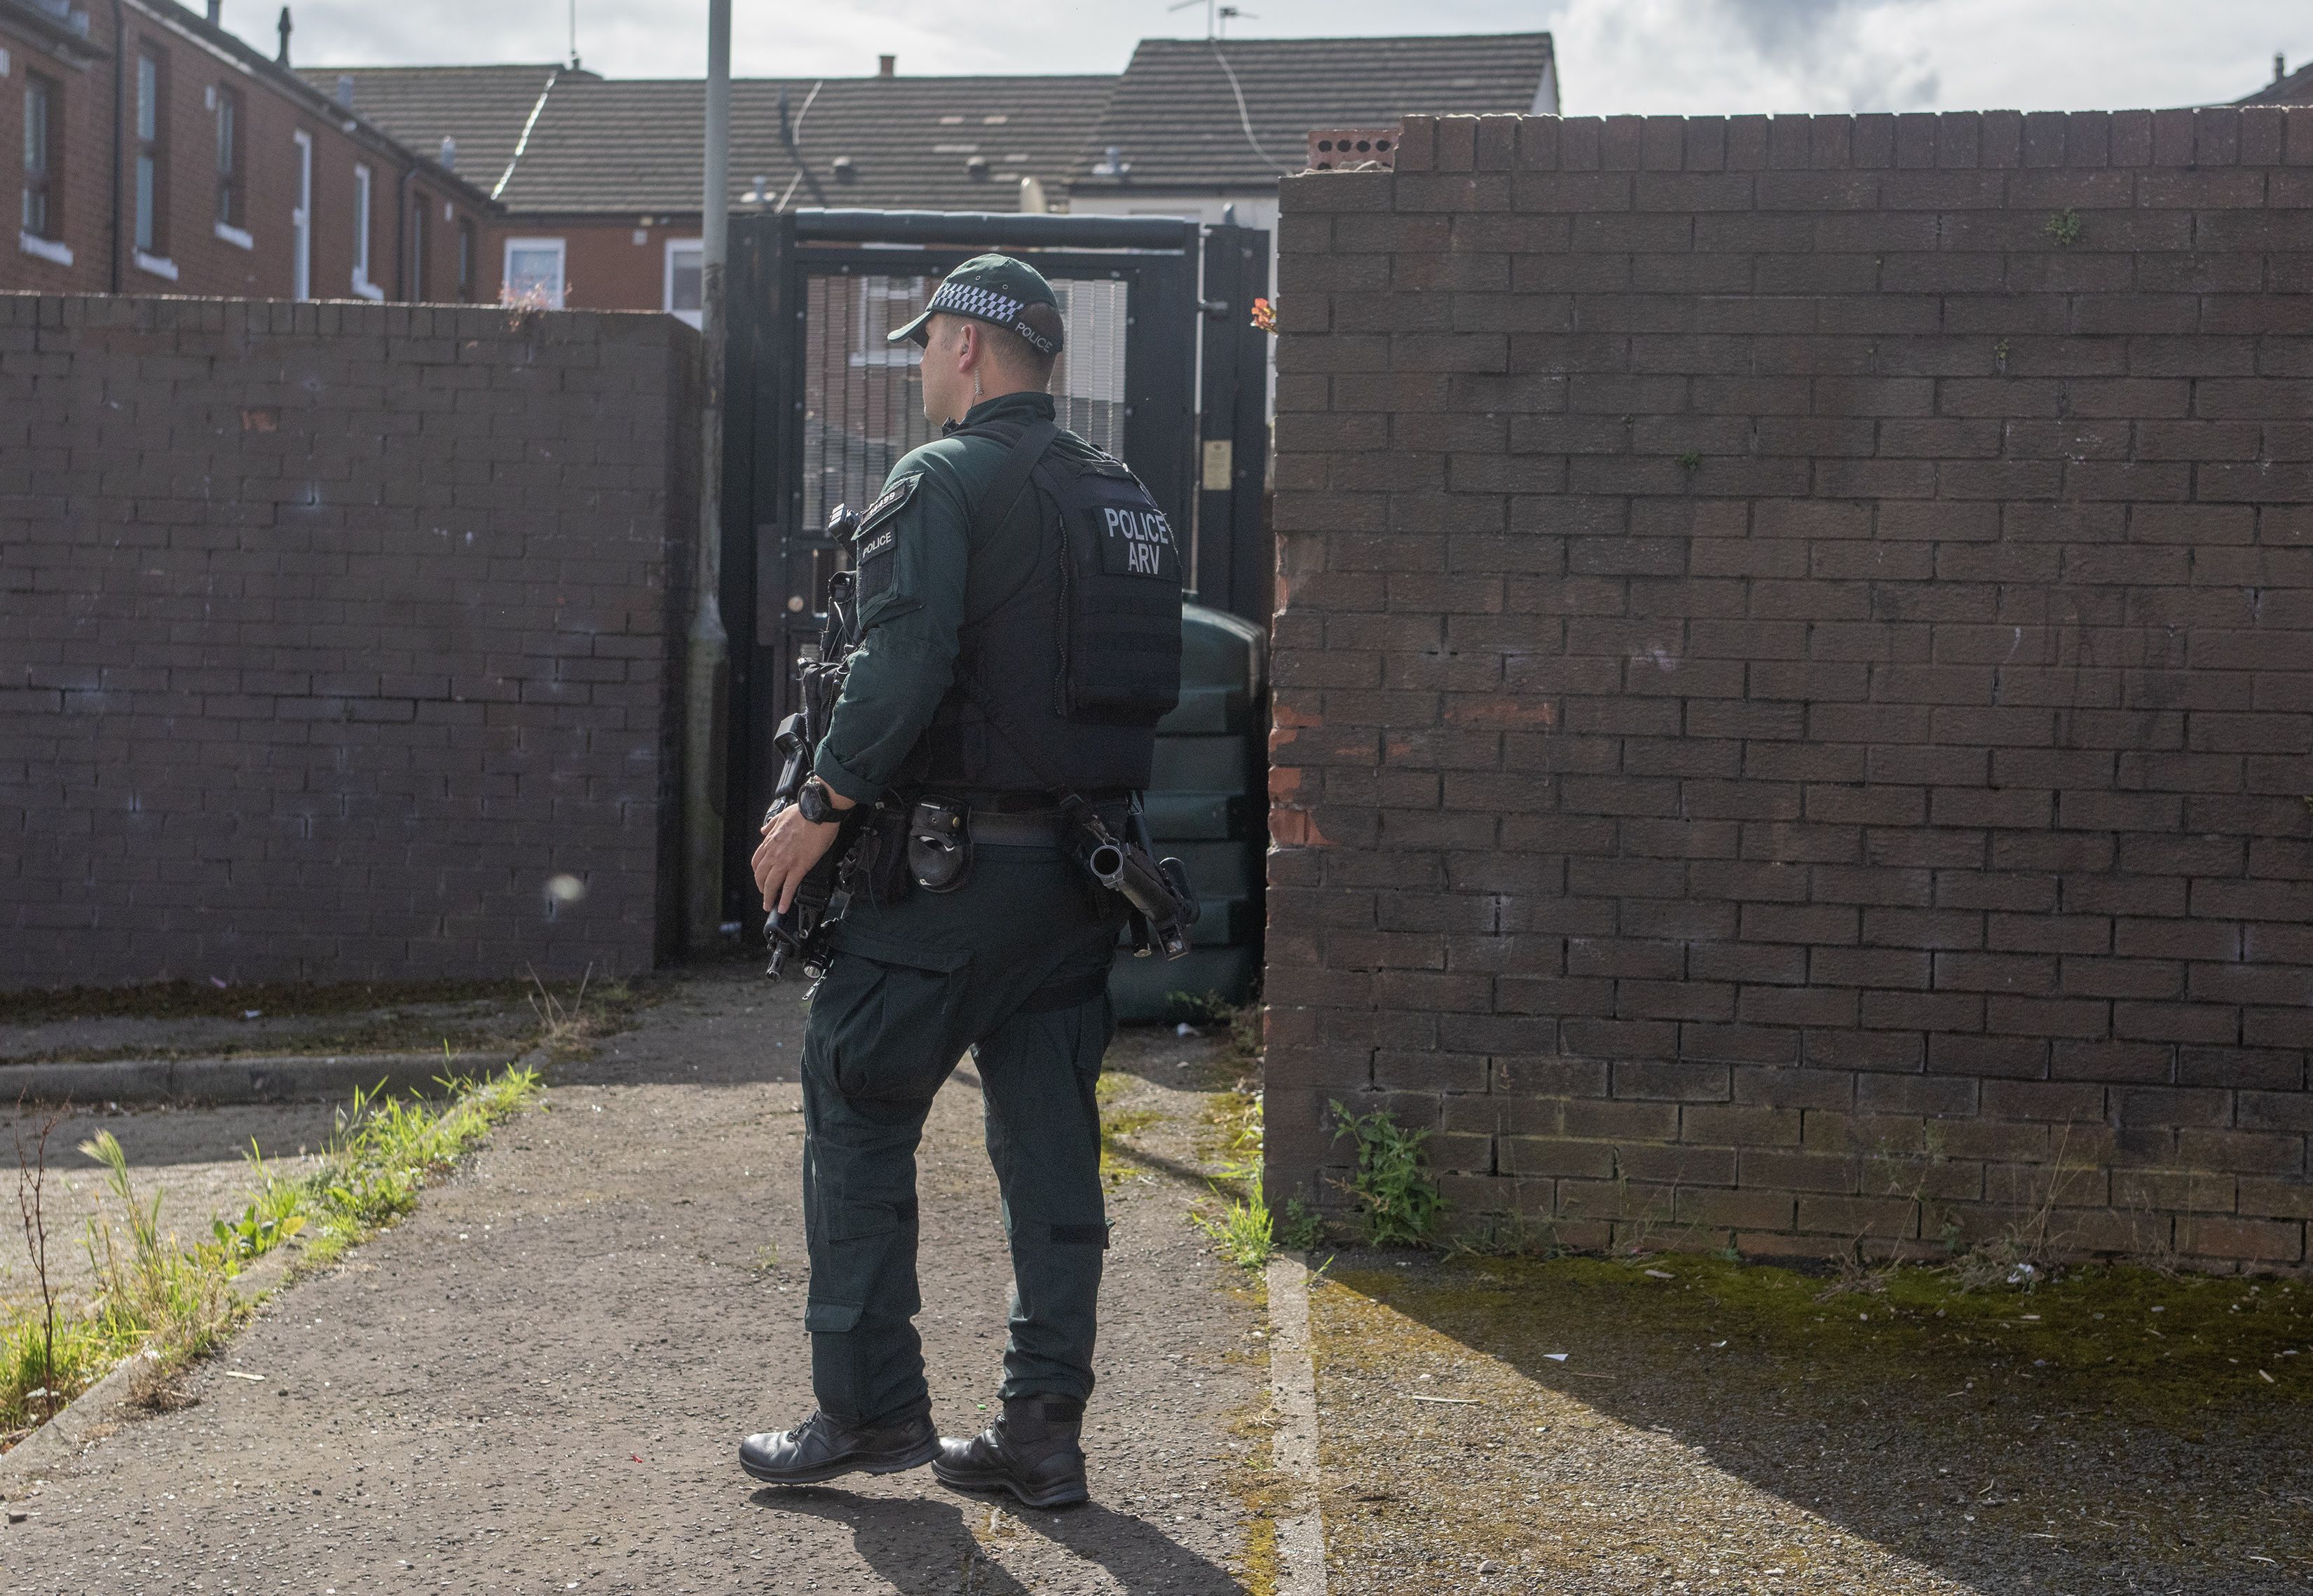 ARREST: Heavily armed police arrest a suspect at a property on Rosapenna Walk off Oldpark Road